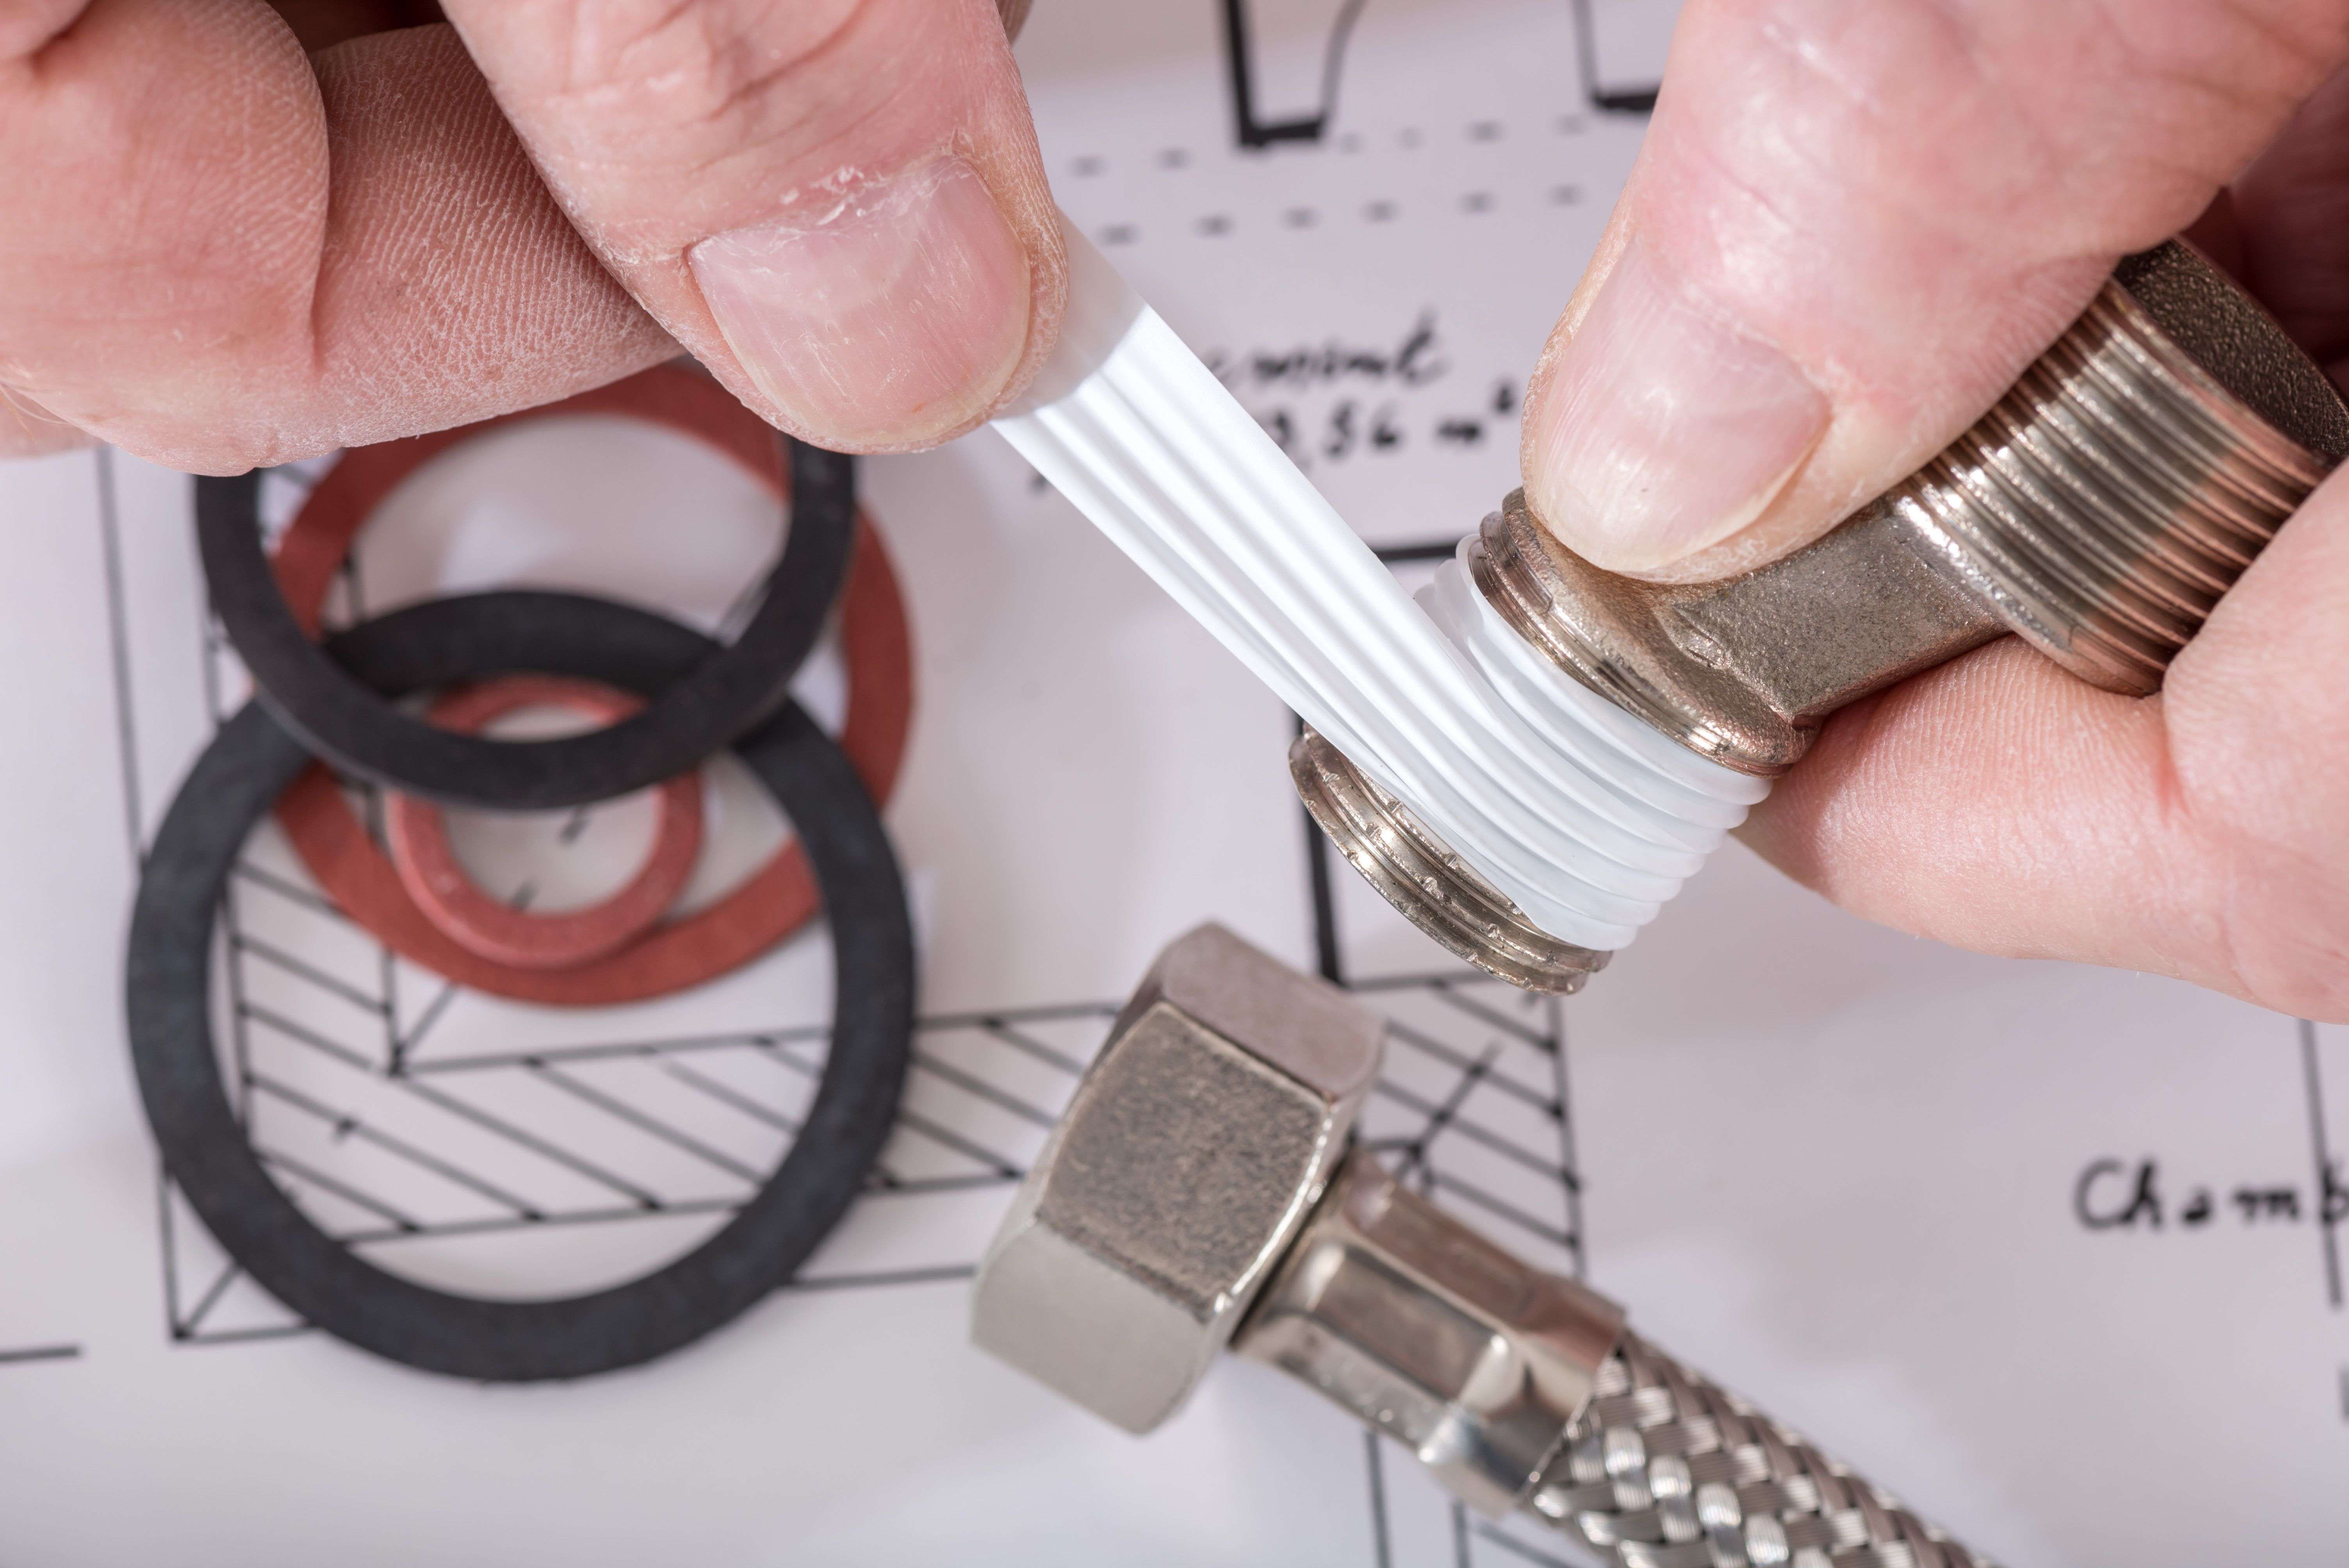 How to apply PTFE tape